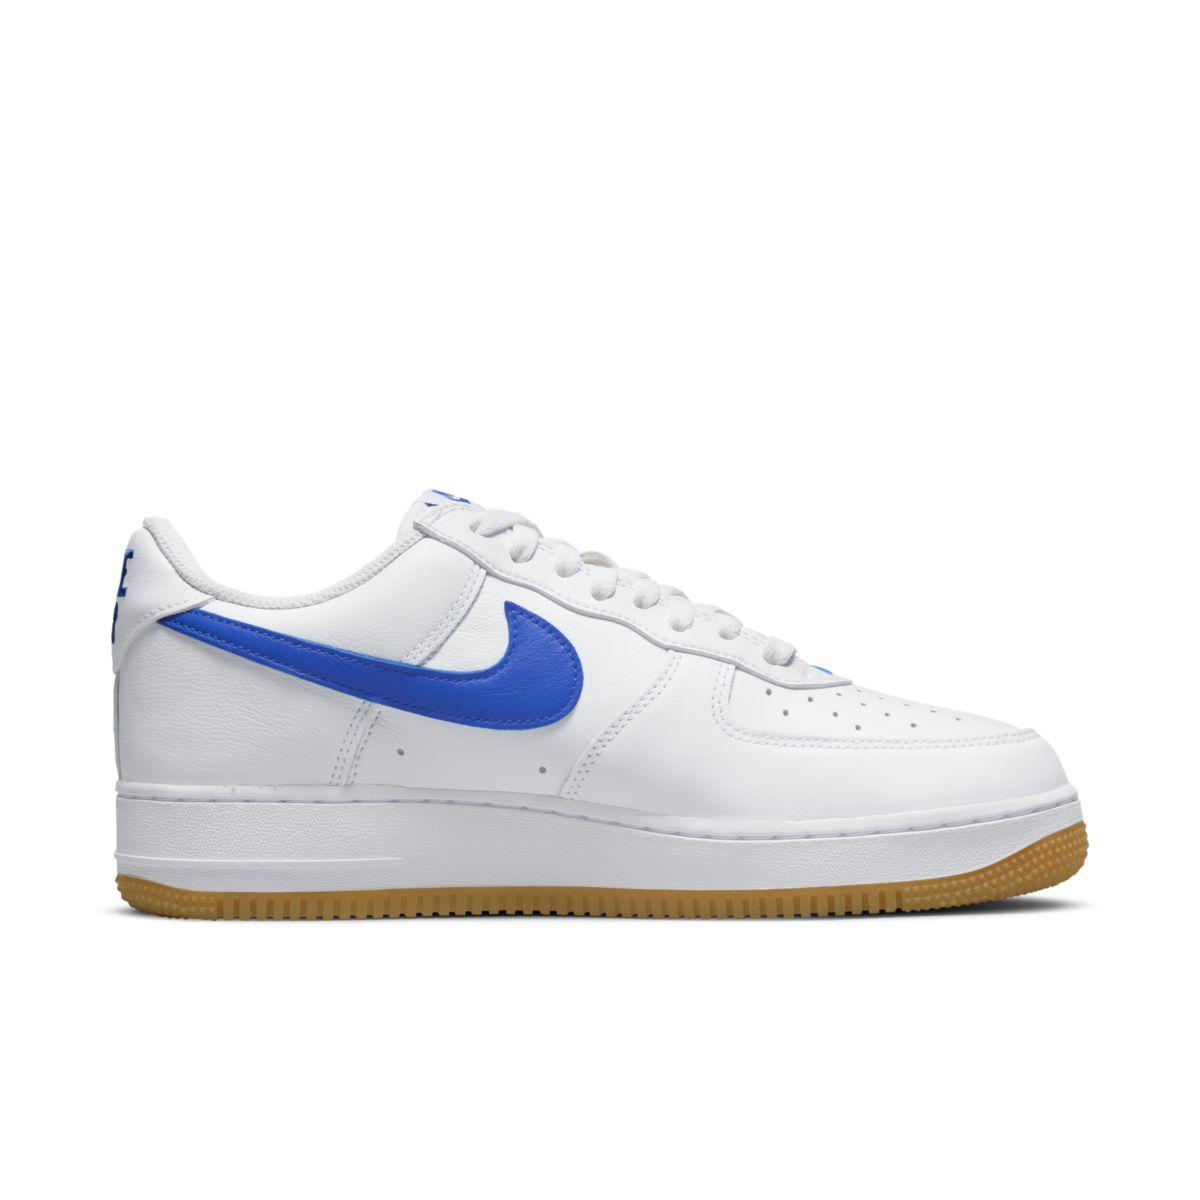 Nike Air Force 1 Low Since 82 DJ3911-101 3